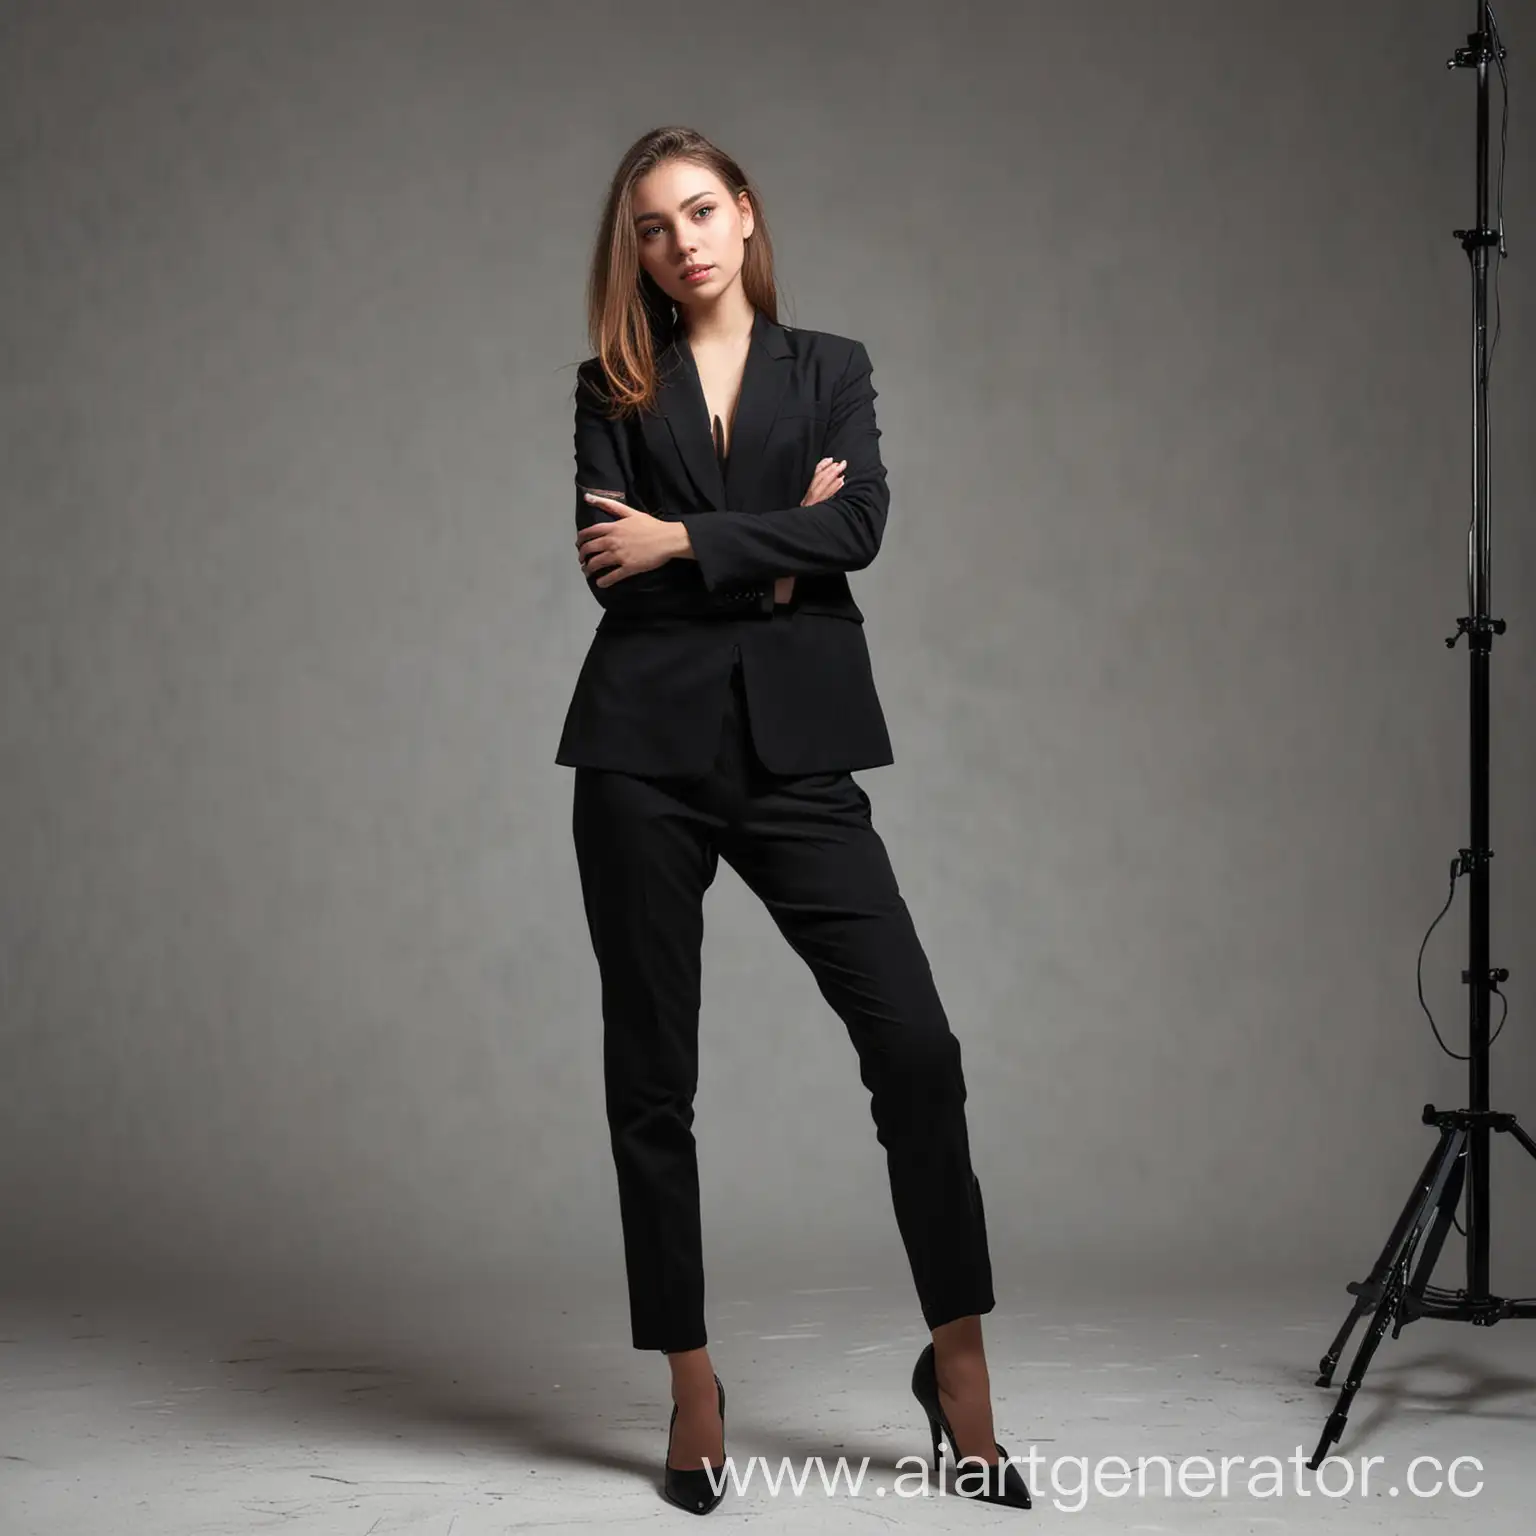 Young-Woman-Posing-in-Elegant-Black-Attire-at-a-Professional-Photo-Studio